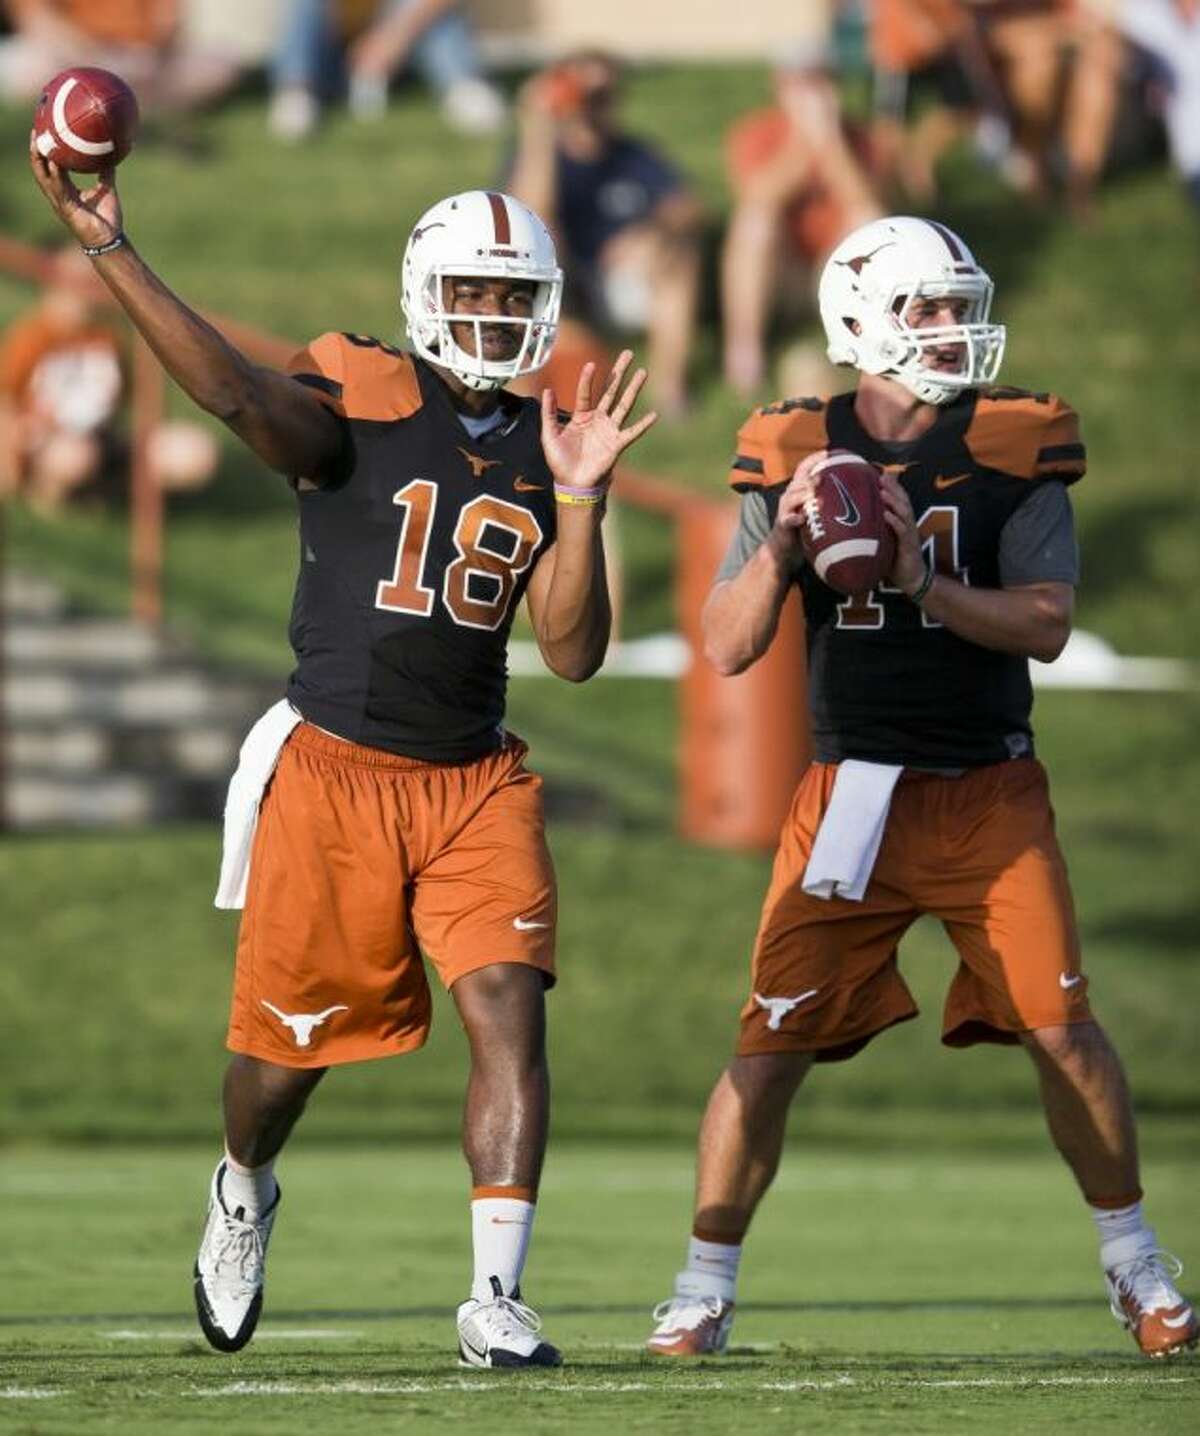 Texas quarterbacks Tyrone Swoopes, left, and David Ash throw during the first day of open practice on Aug. 8 at the Frank Denius Fields on the campus of the University of Texas at Austin.